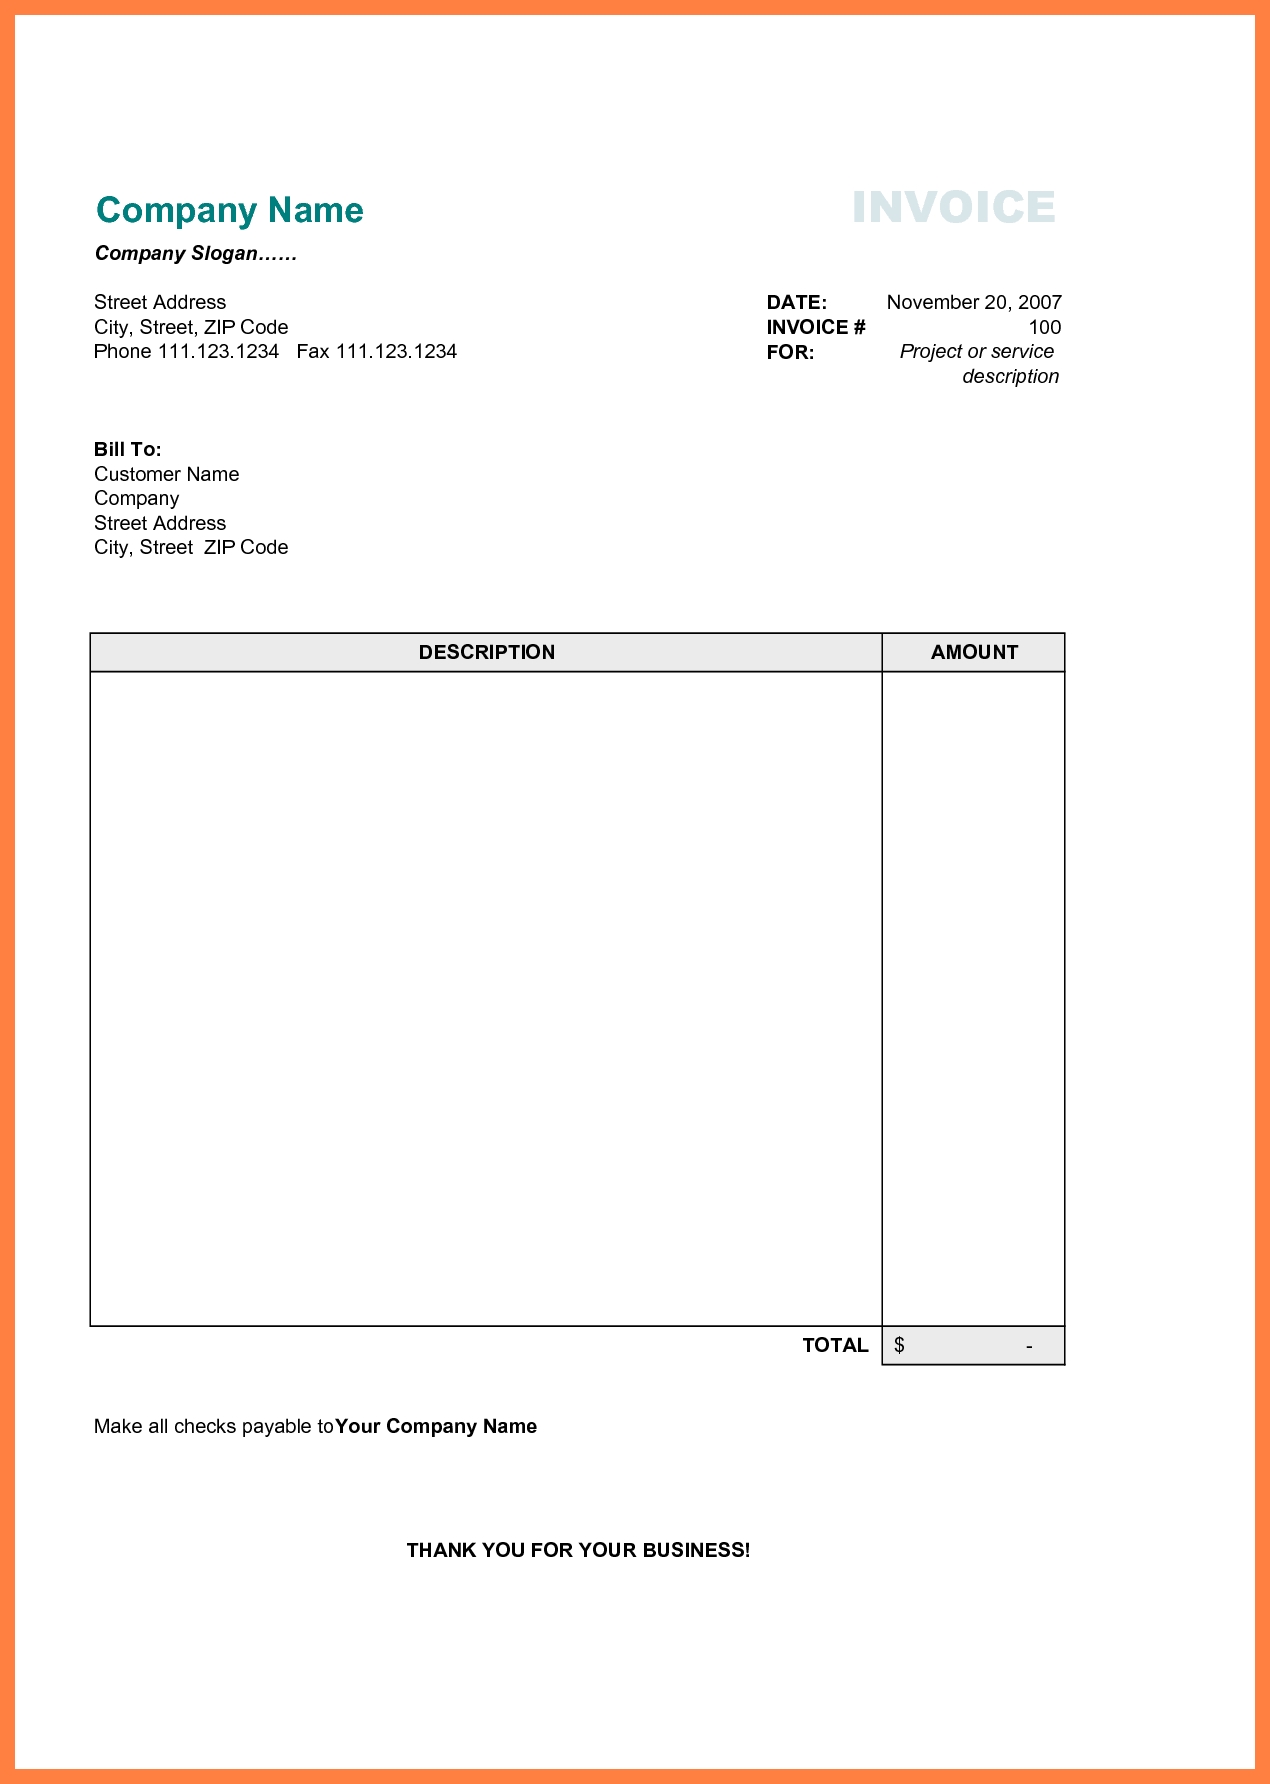 free printable business invoice template invoice format in basic blank invoice form